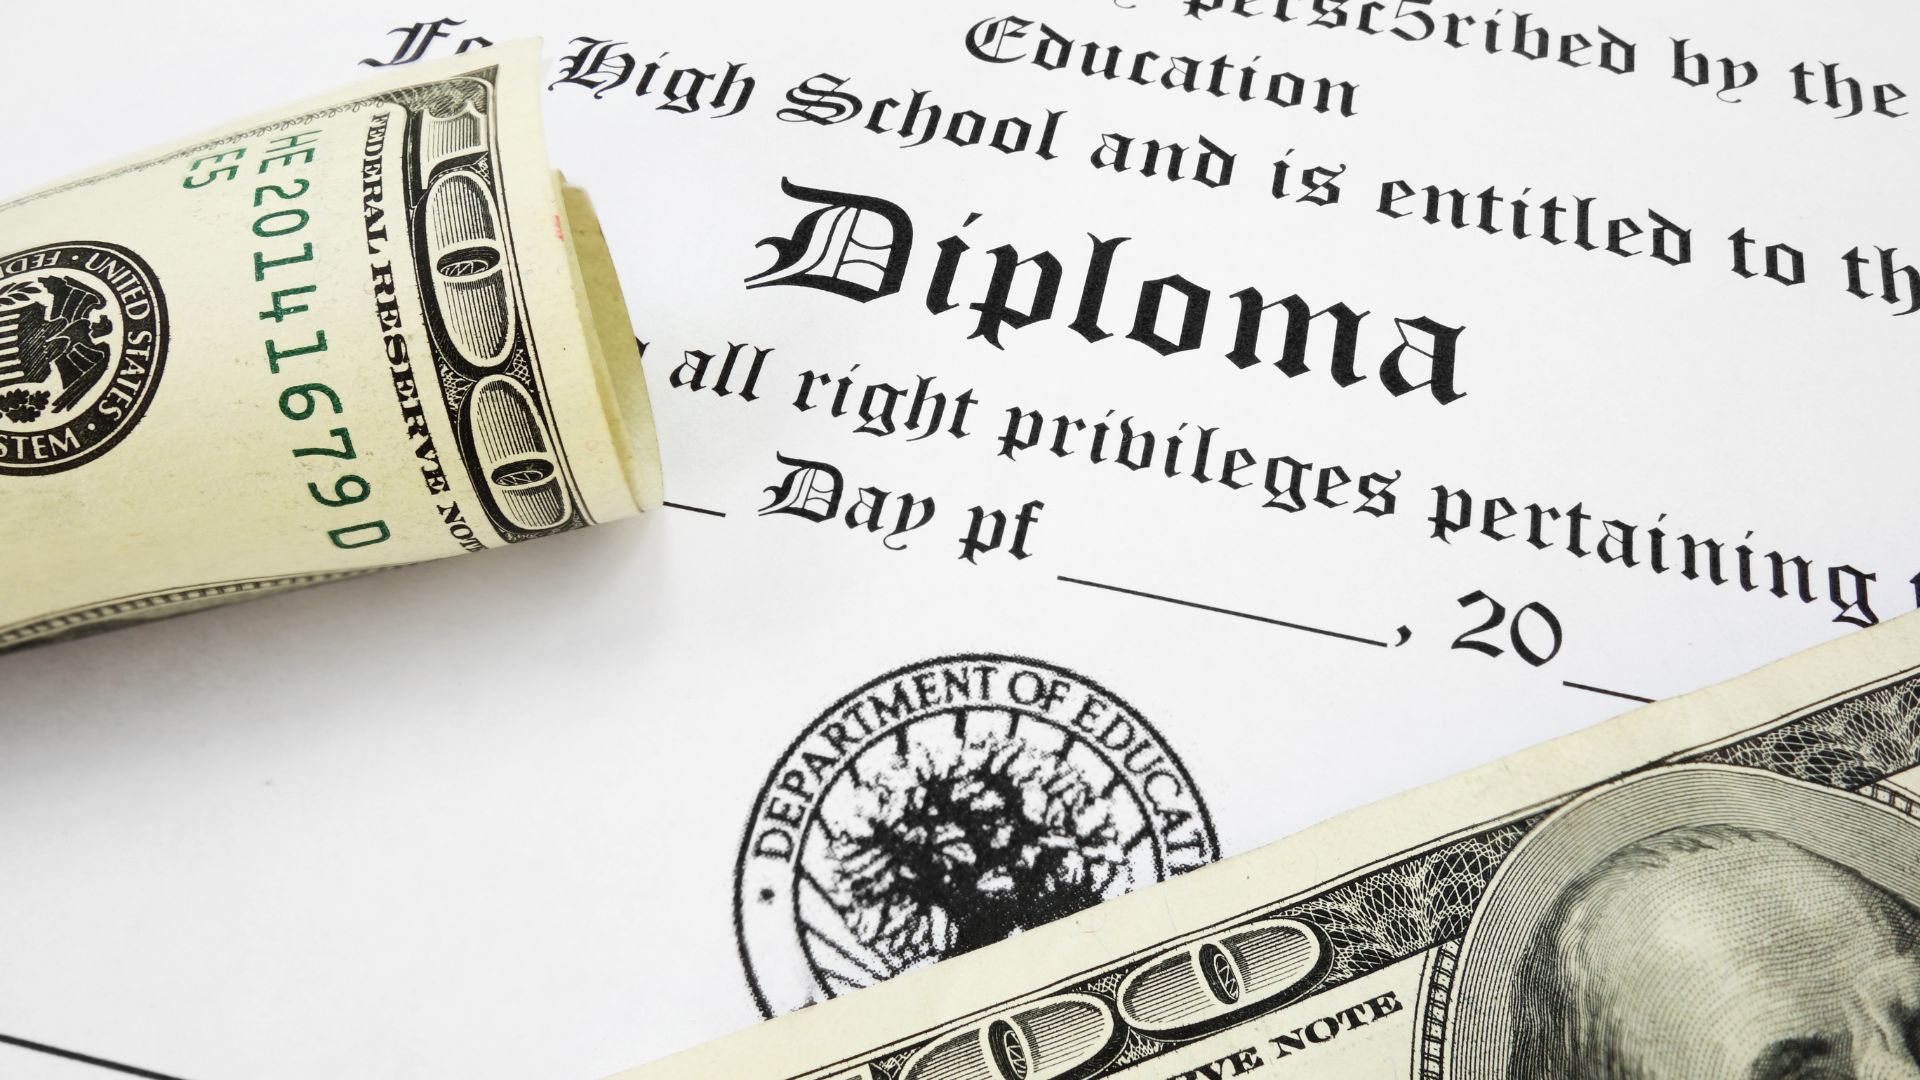 college diploma next to stacks of money bills currency